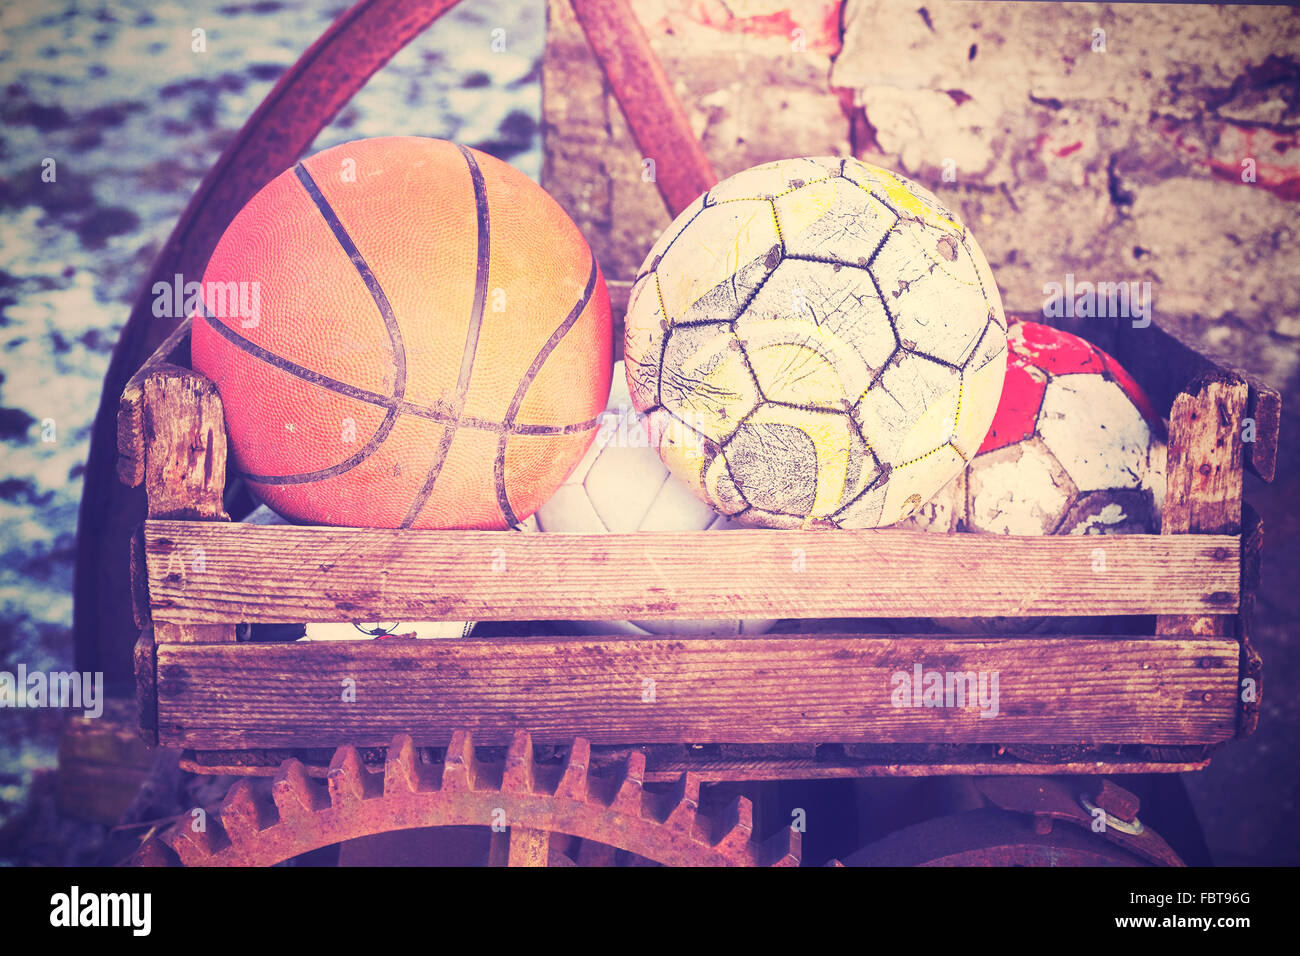 Vintage old film stylized used balls in a basket, shallow depth of field. Stock Photo